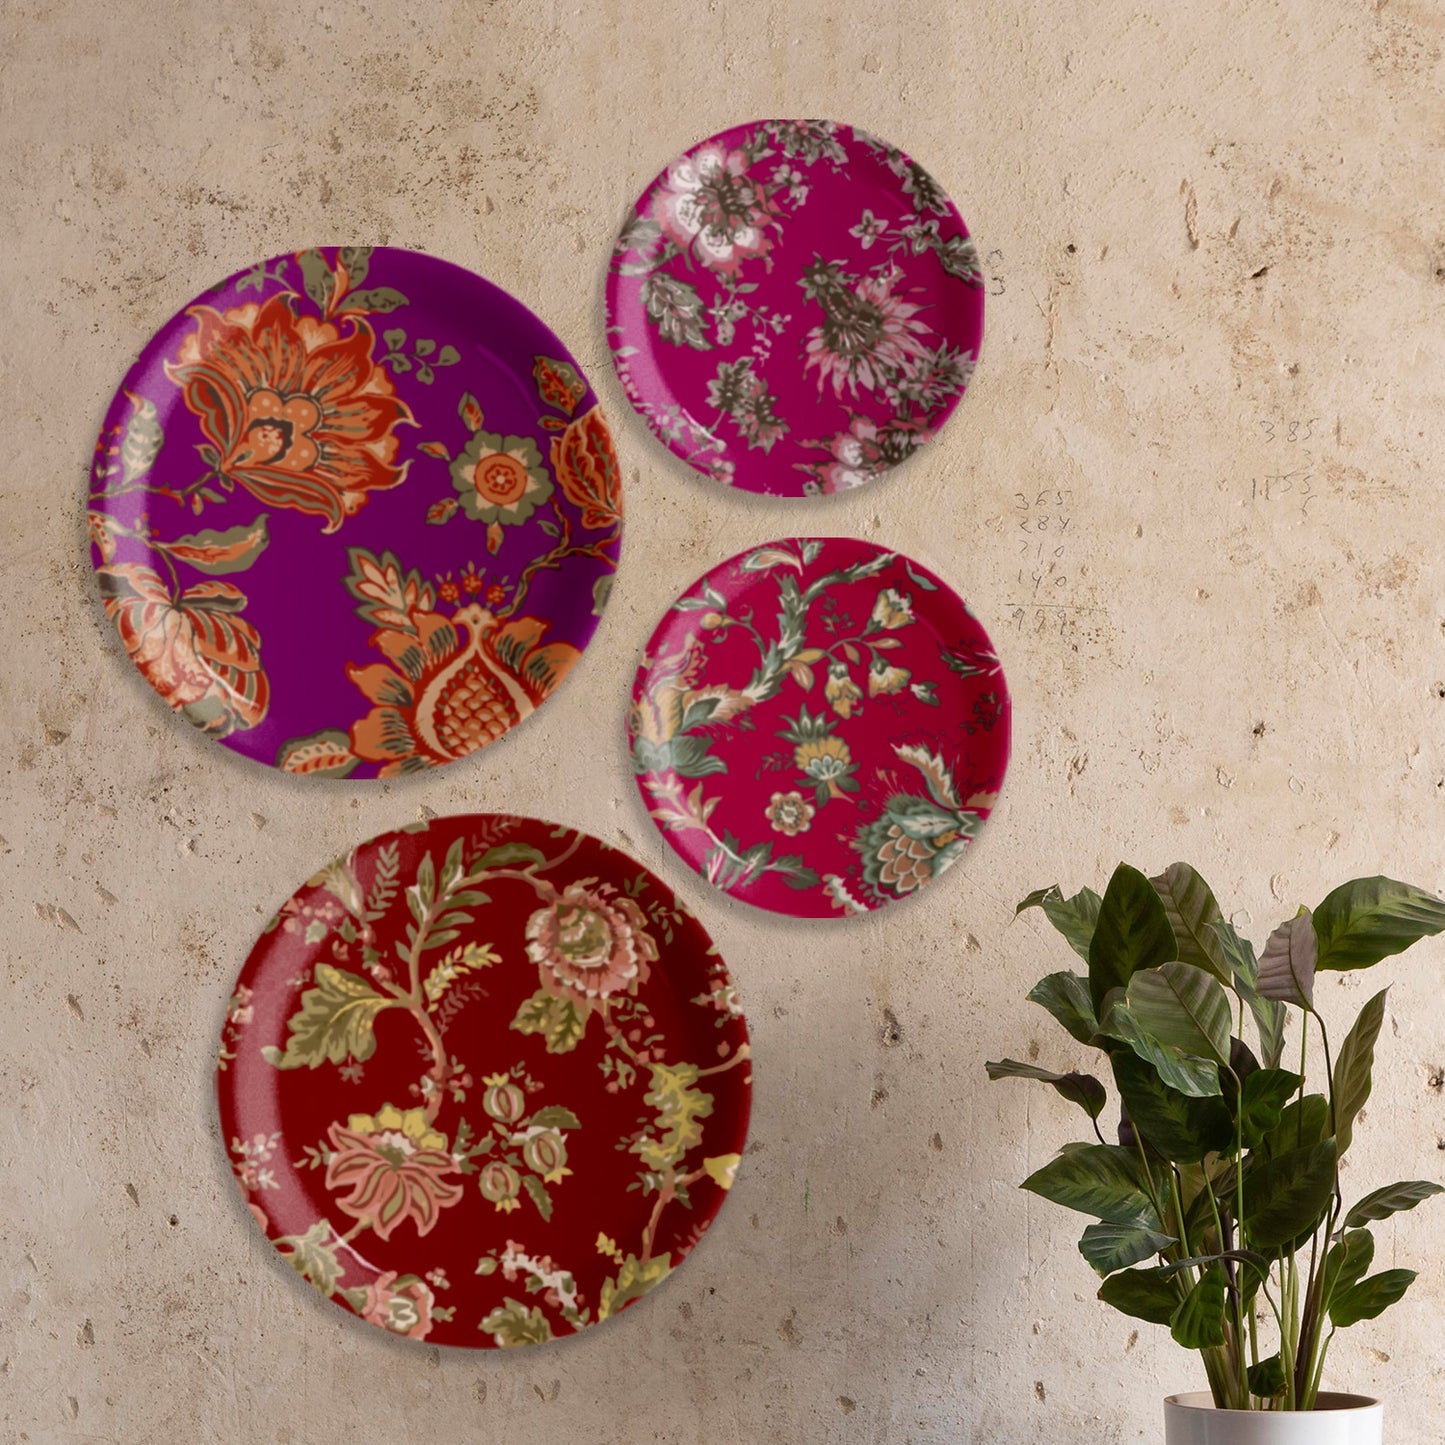 Ethnic Floral Wall Plate